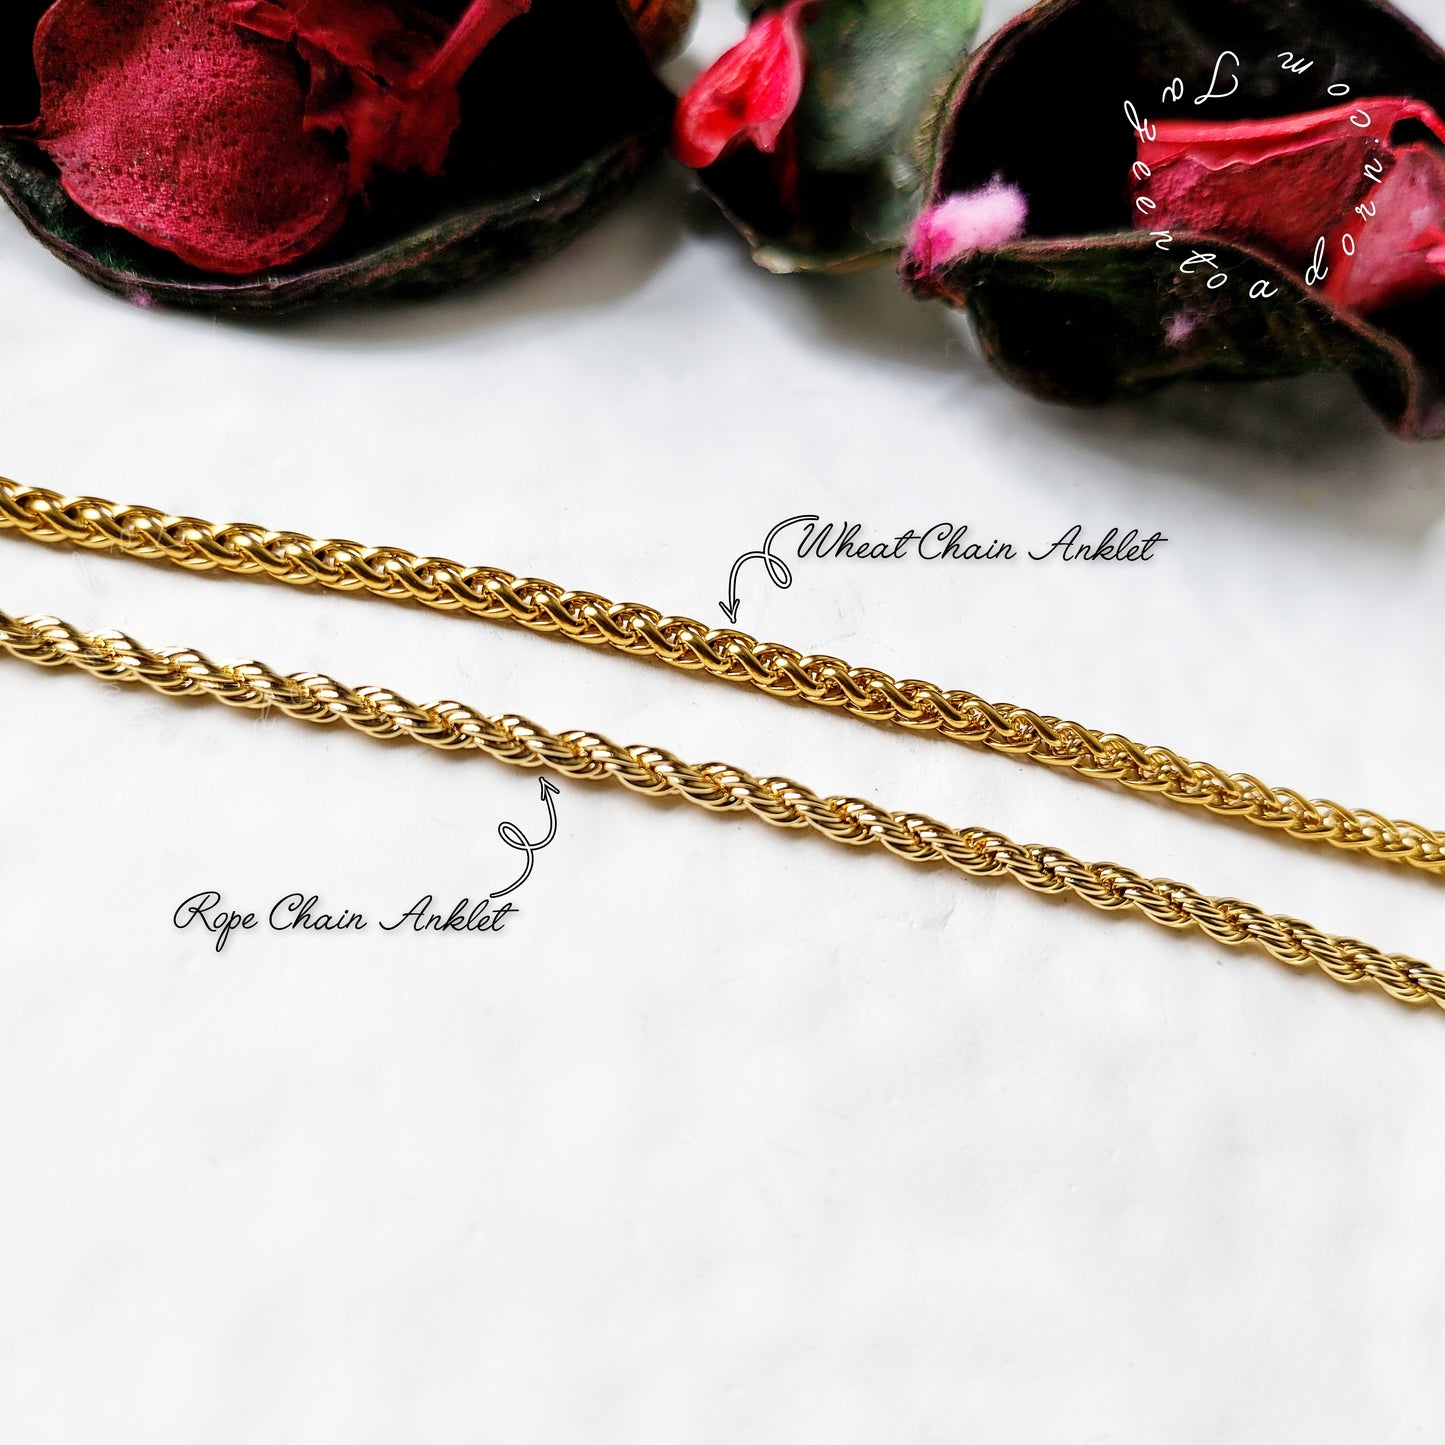 Rope Chain Anklet - Jewellery Everyday Essentials gifts - HOLLY - PREORDER